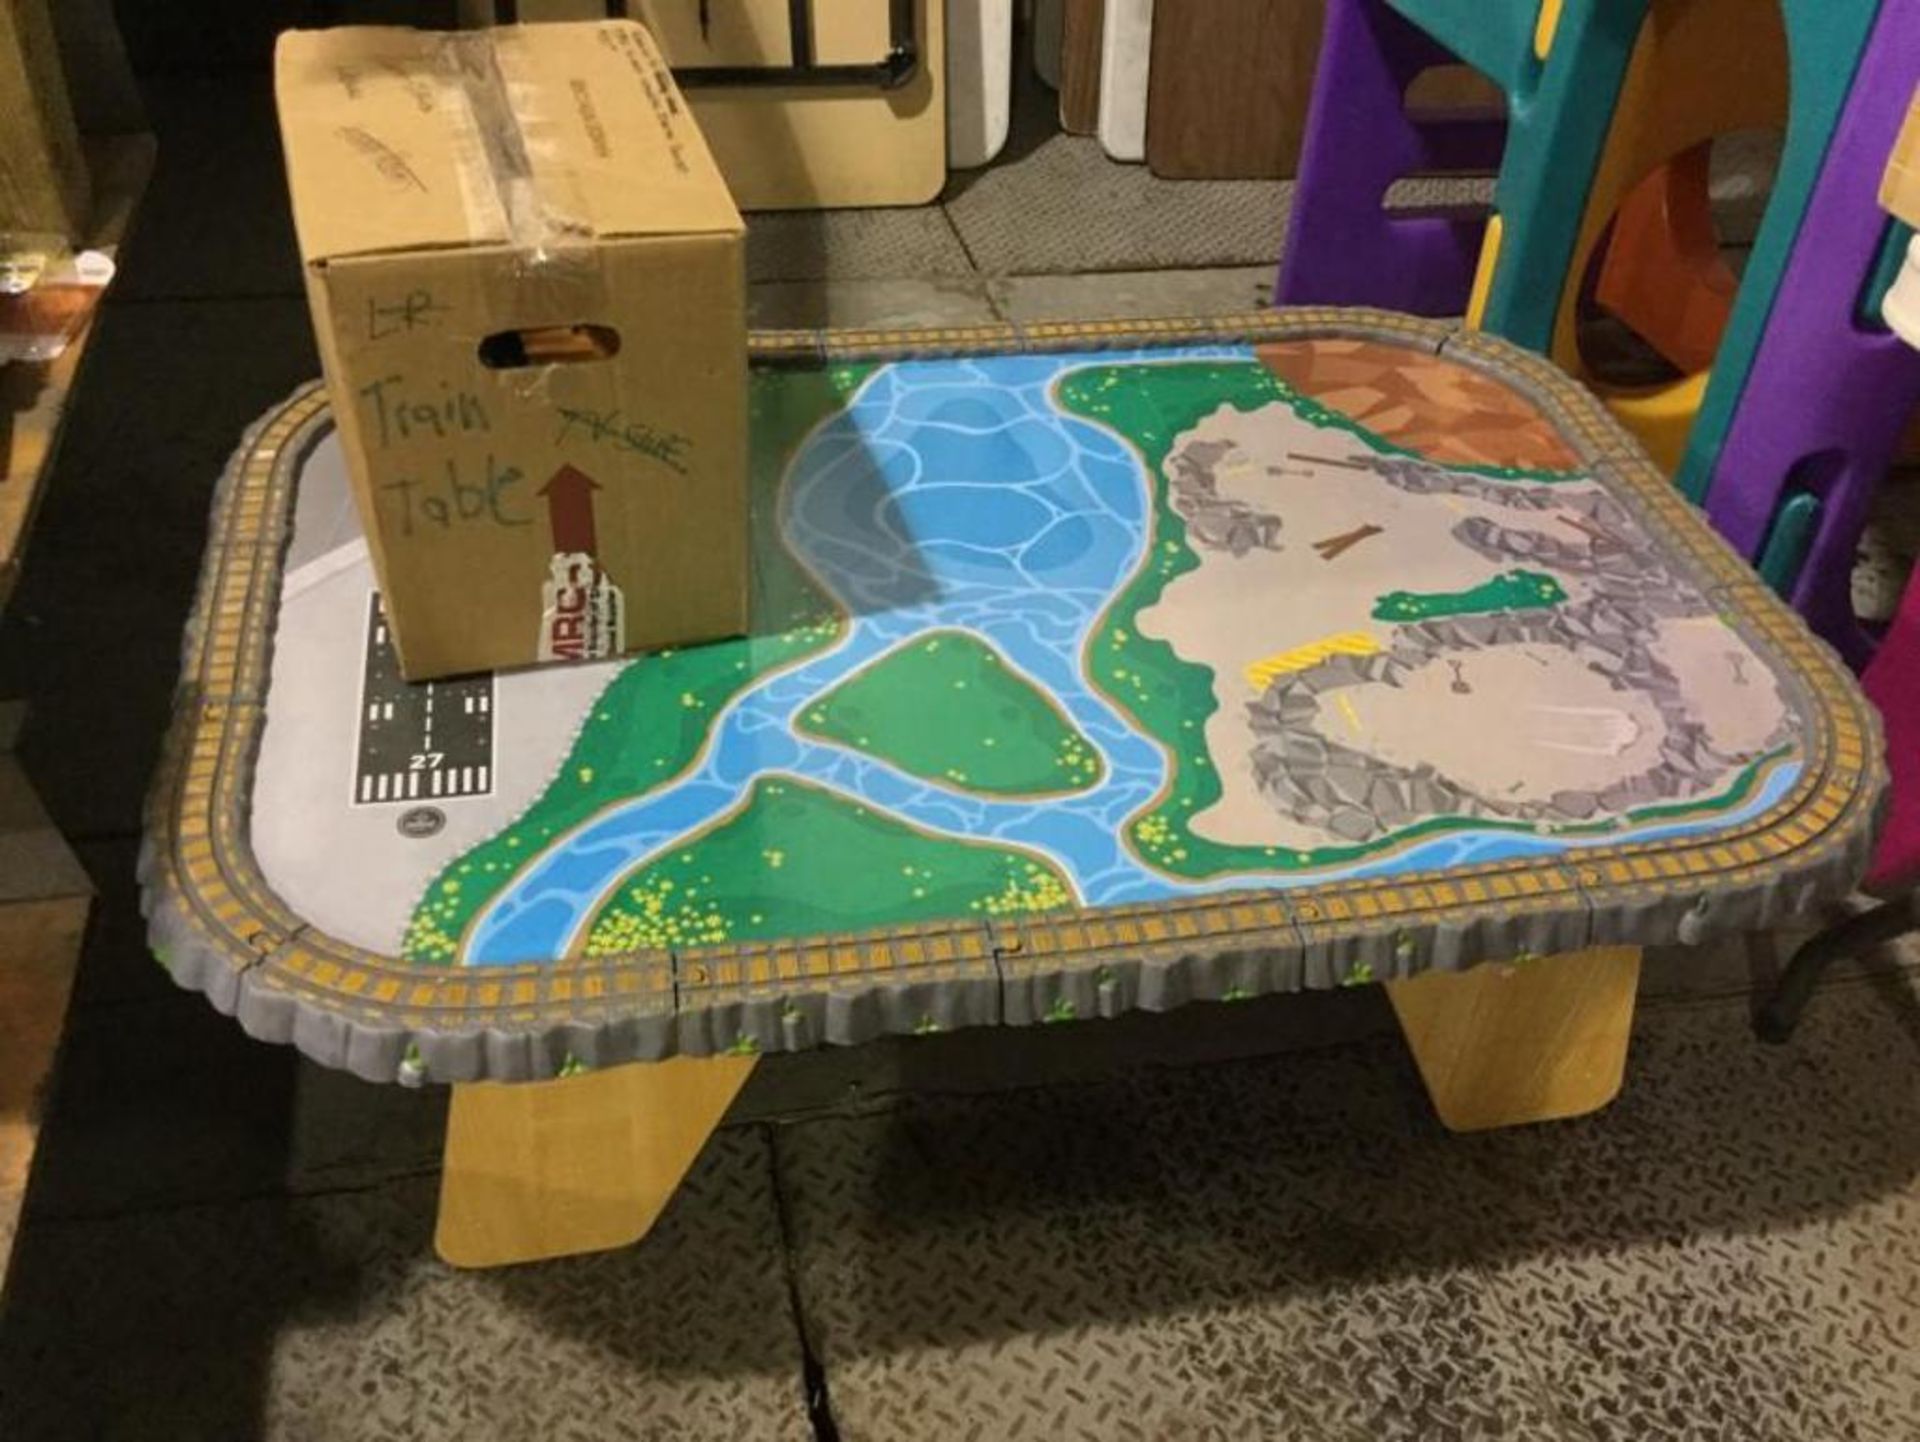 Thomas Train Style Table with accessories